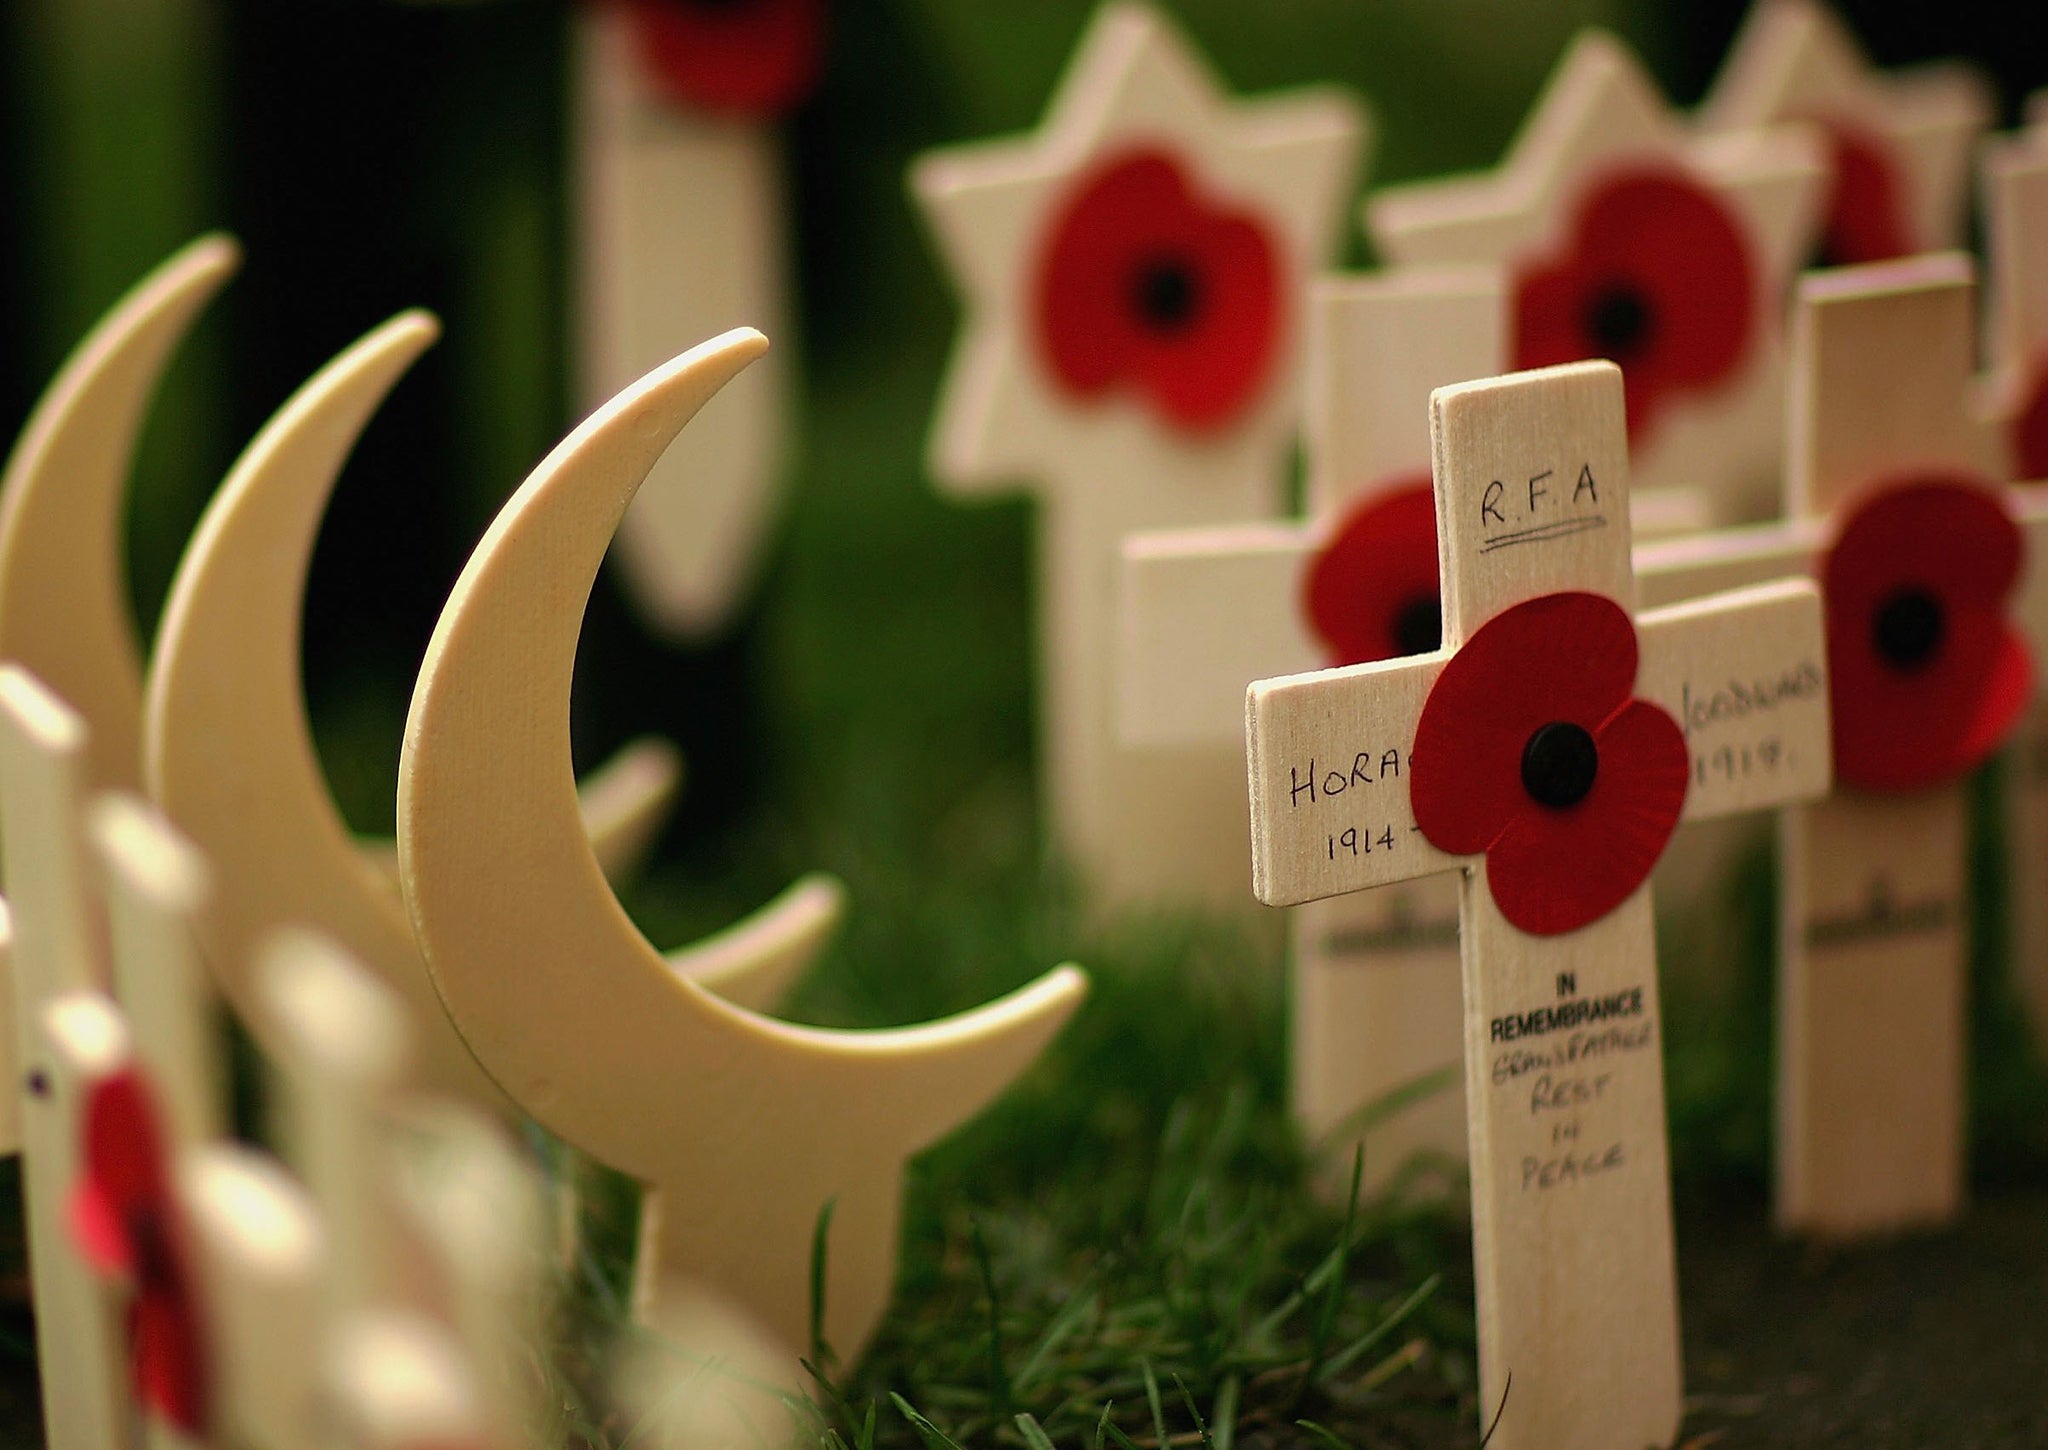 Wooden crescents represent Muslim soldiers in Westminster Abbey’s Royal British Legion Poppy Factory Field of Remembrance. The crescent of Islam doesn’t allow other symbols to be attached to it